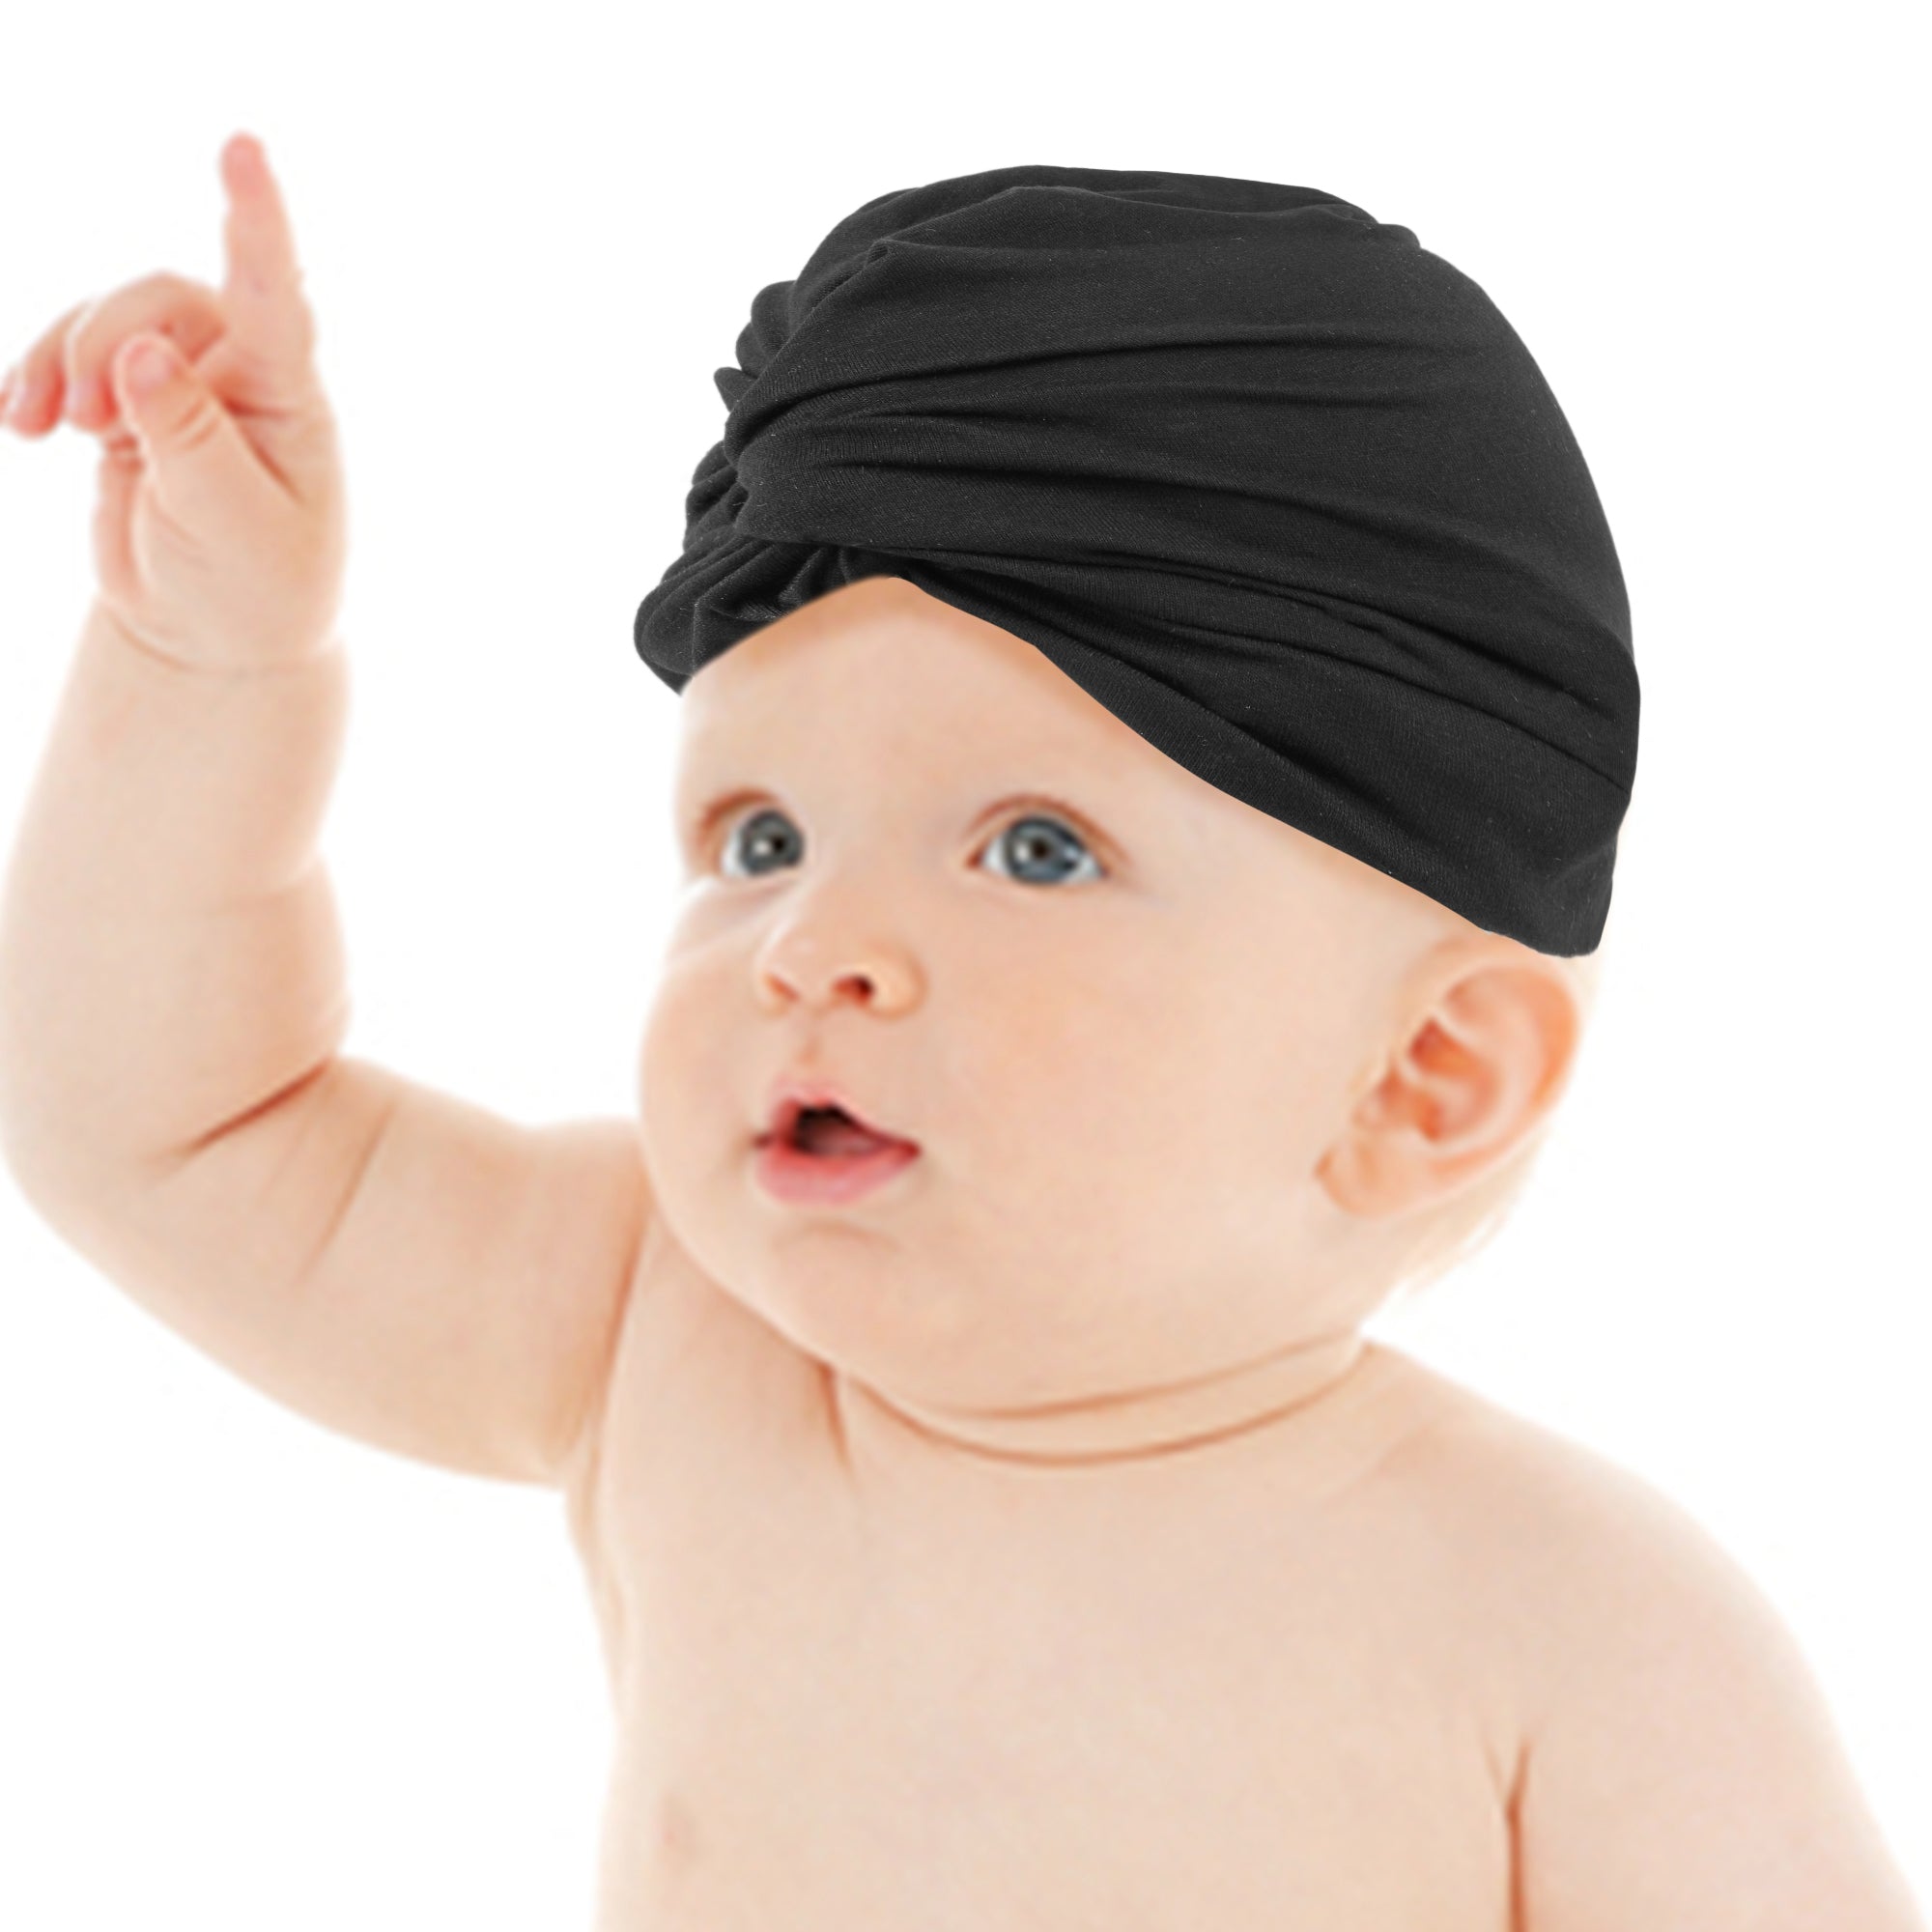 Baby Moo Cute Knotted Turban Cap Infant Beanie - Black - Baby Moo